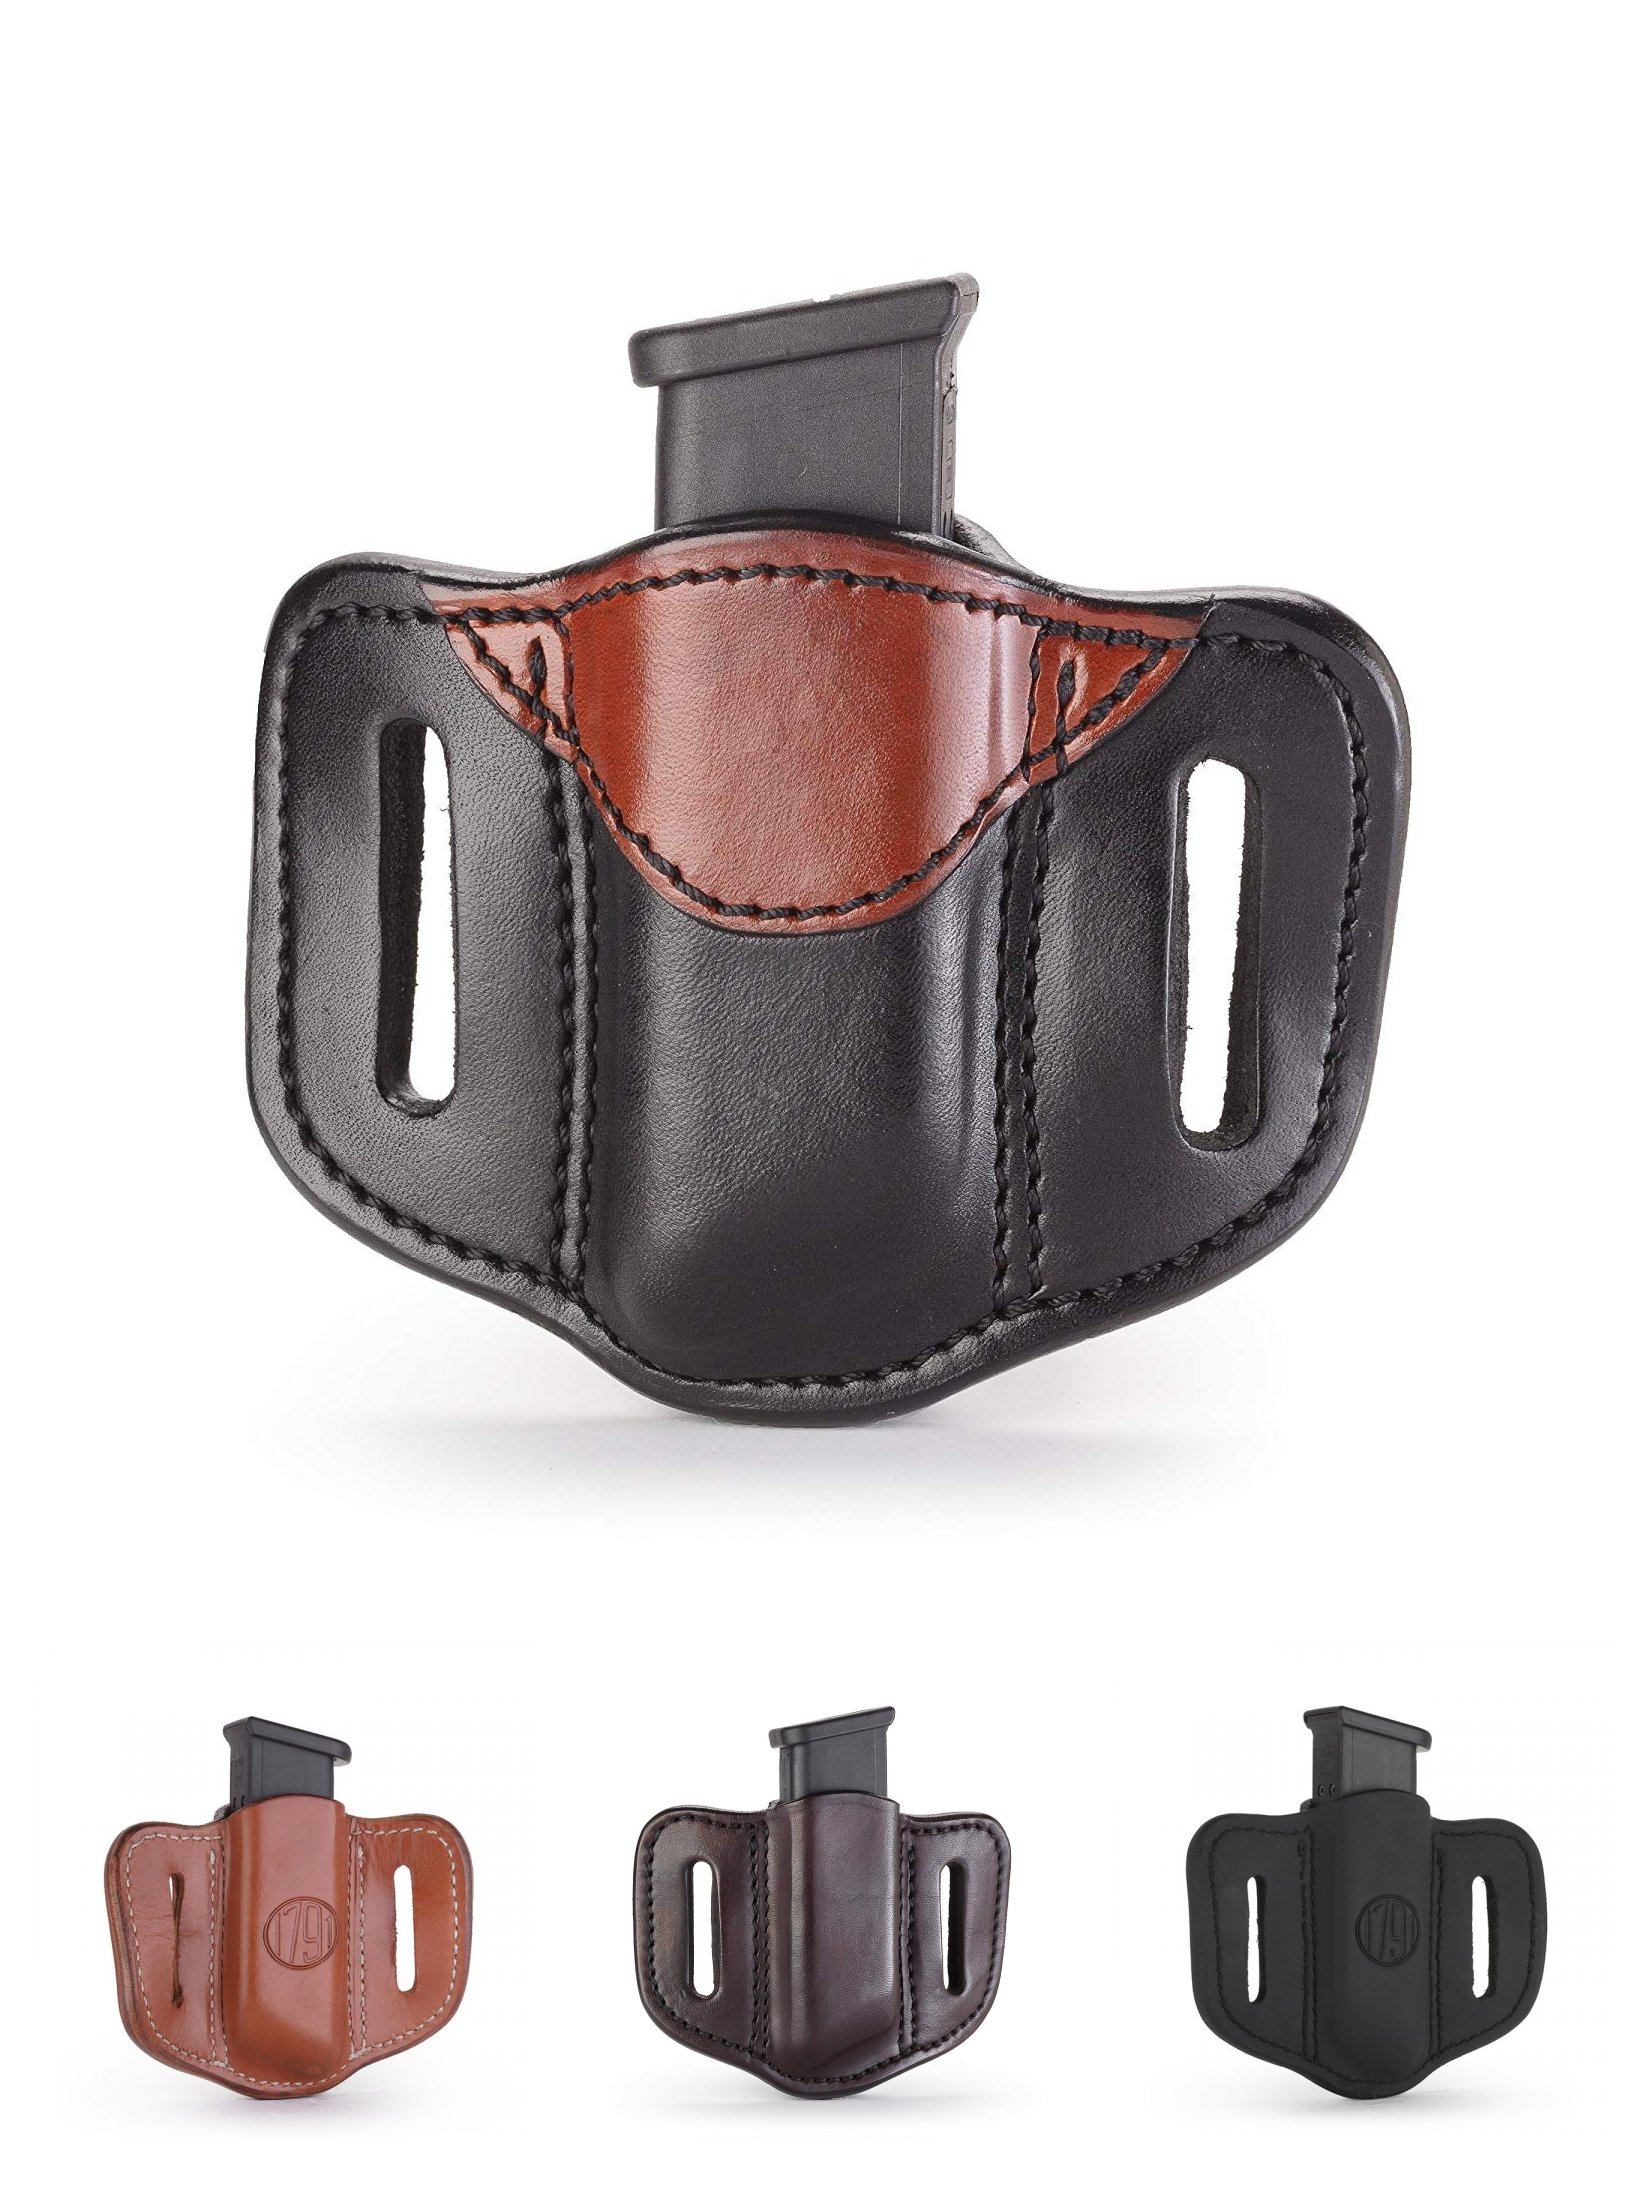 MAG 2.1 - Double Mag Carrier Single Stack Mags - 1791 Gunleather